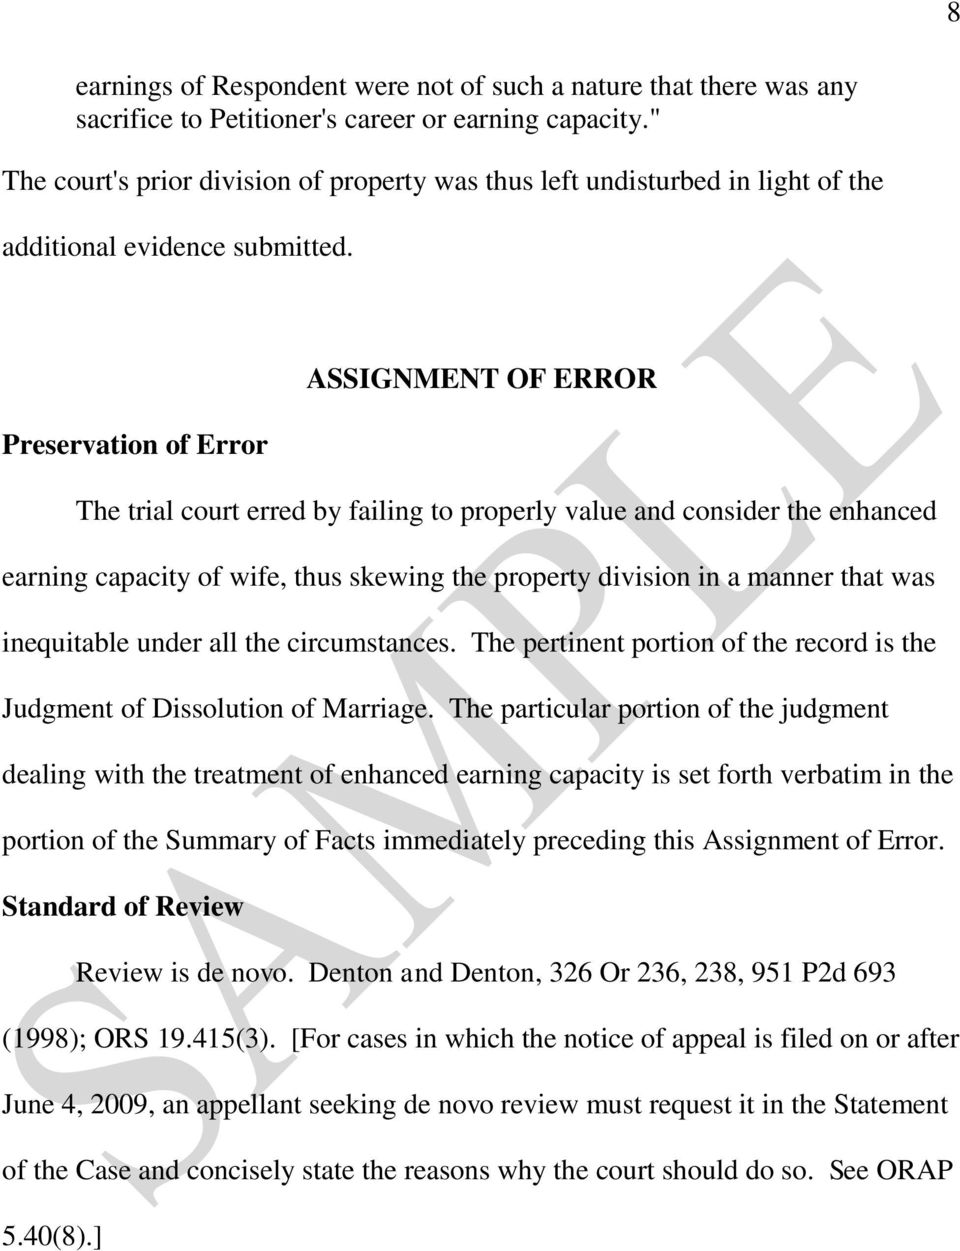 ASSIGNMENT OF ERROR Preservation of Error The trial court erred by failing to properly value and consider the enhanced earning capacity of wife, thus skewing the property division in a manner that